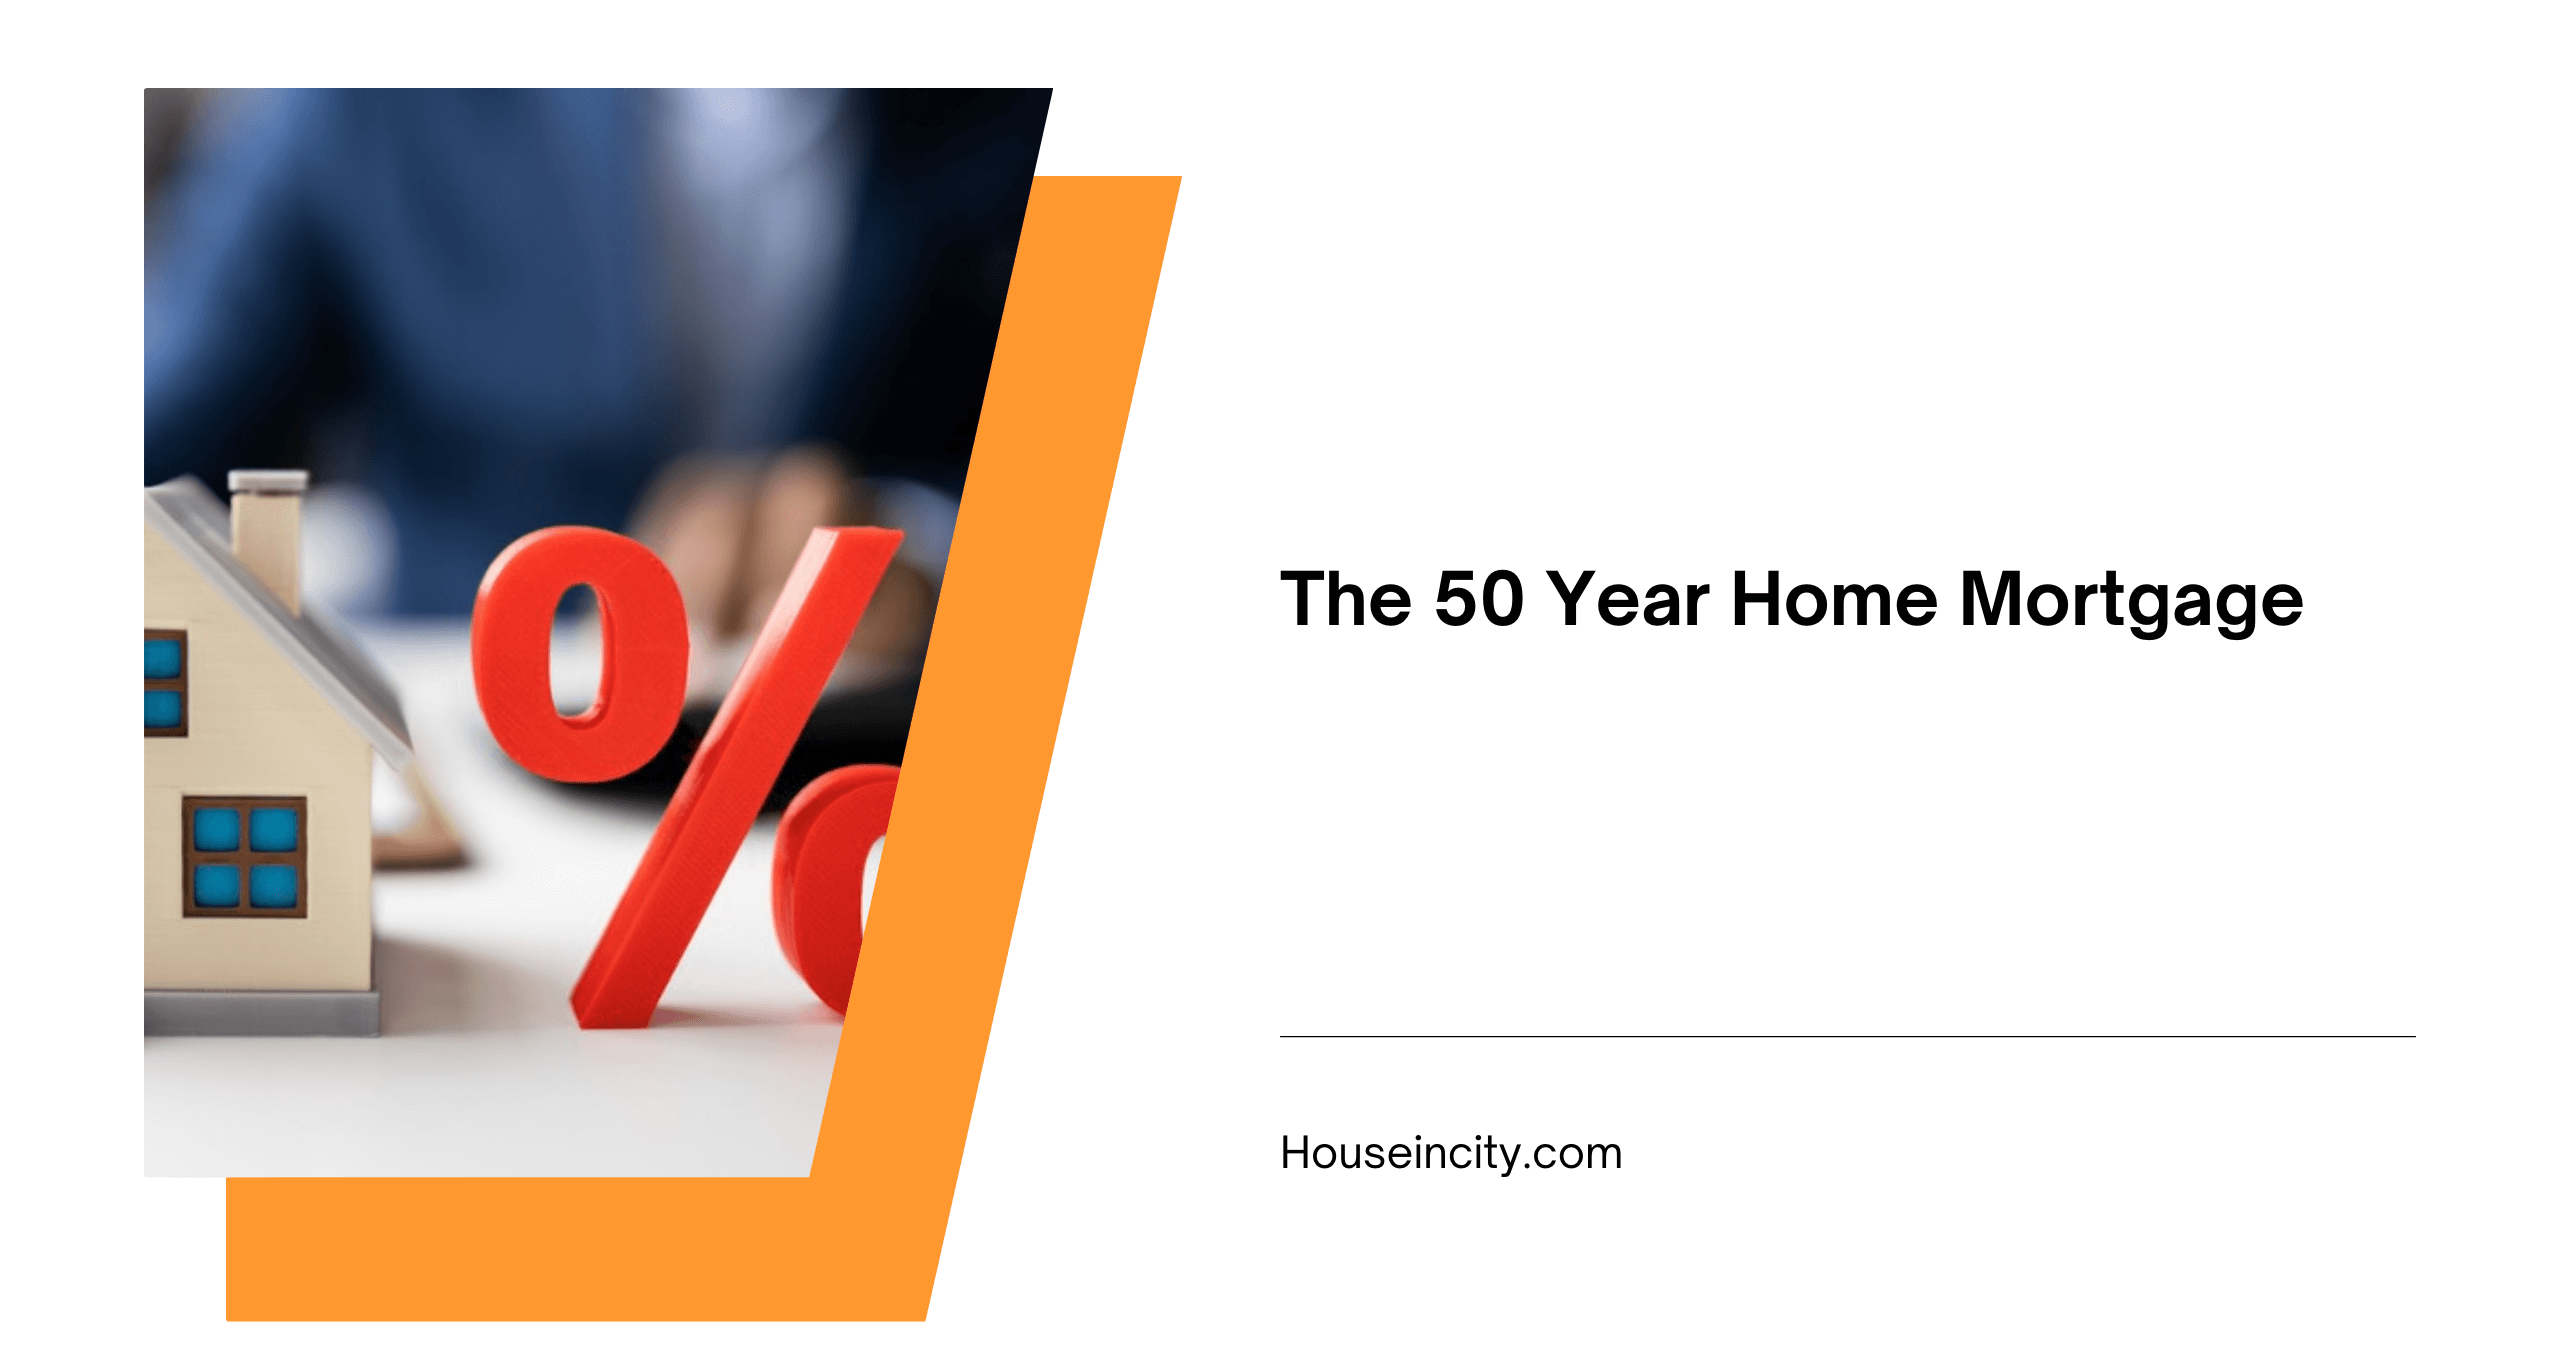 The 50 Year Home Mortgage